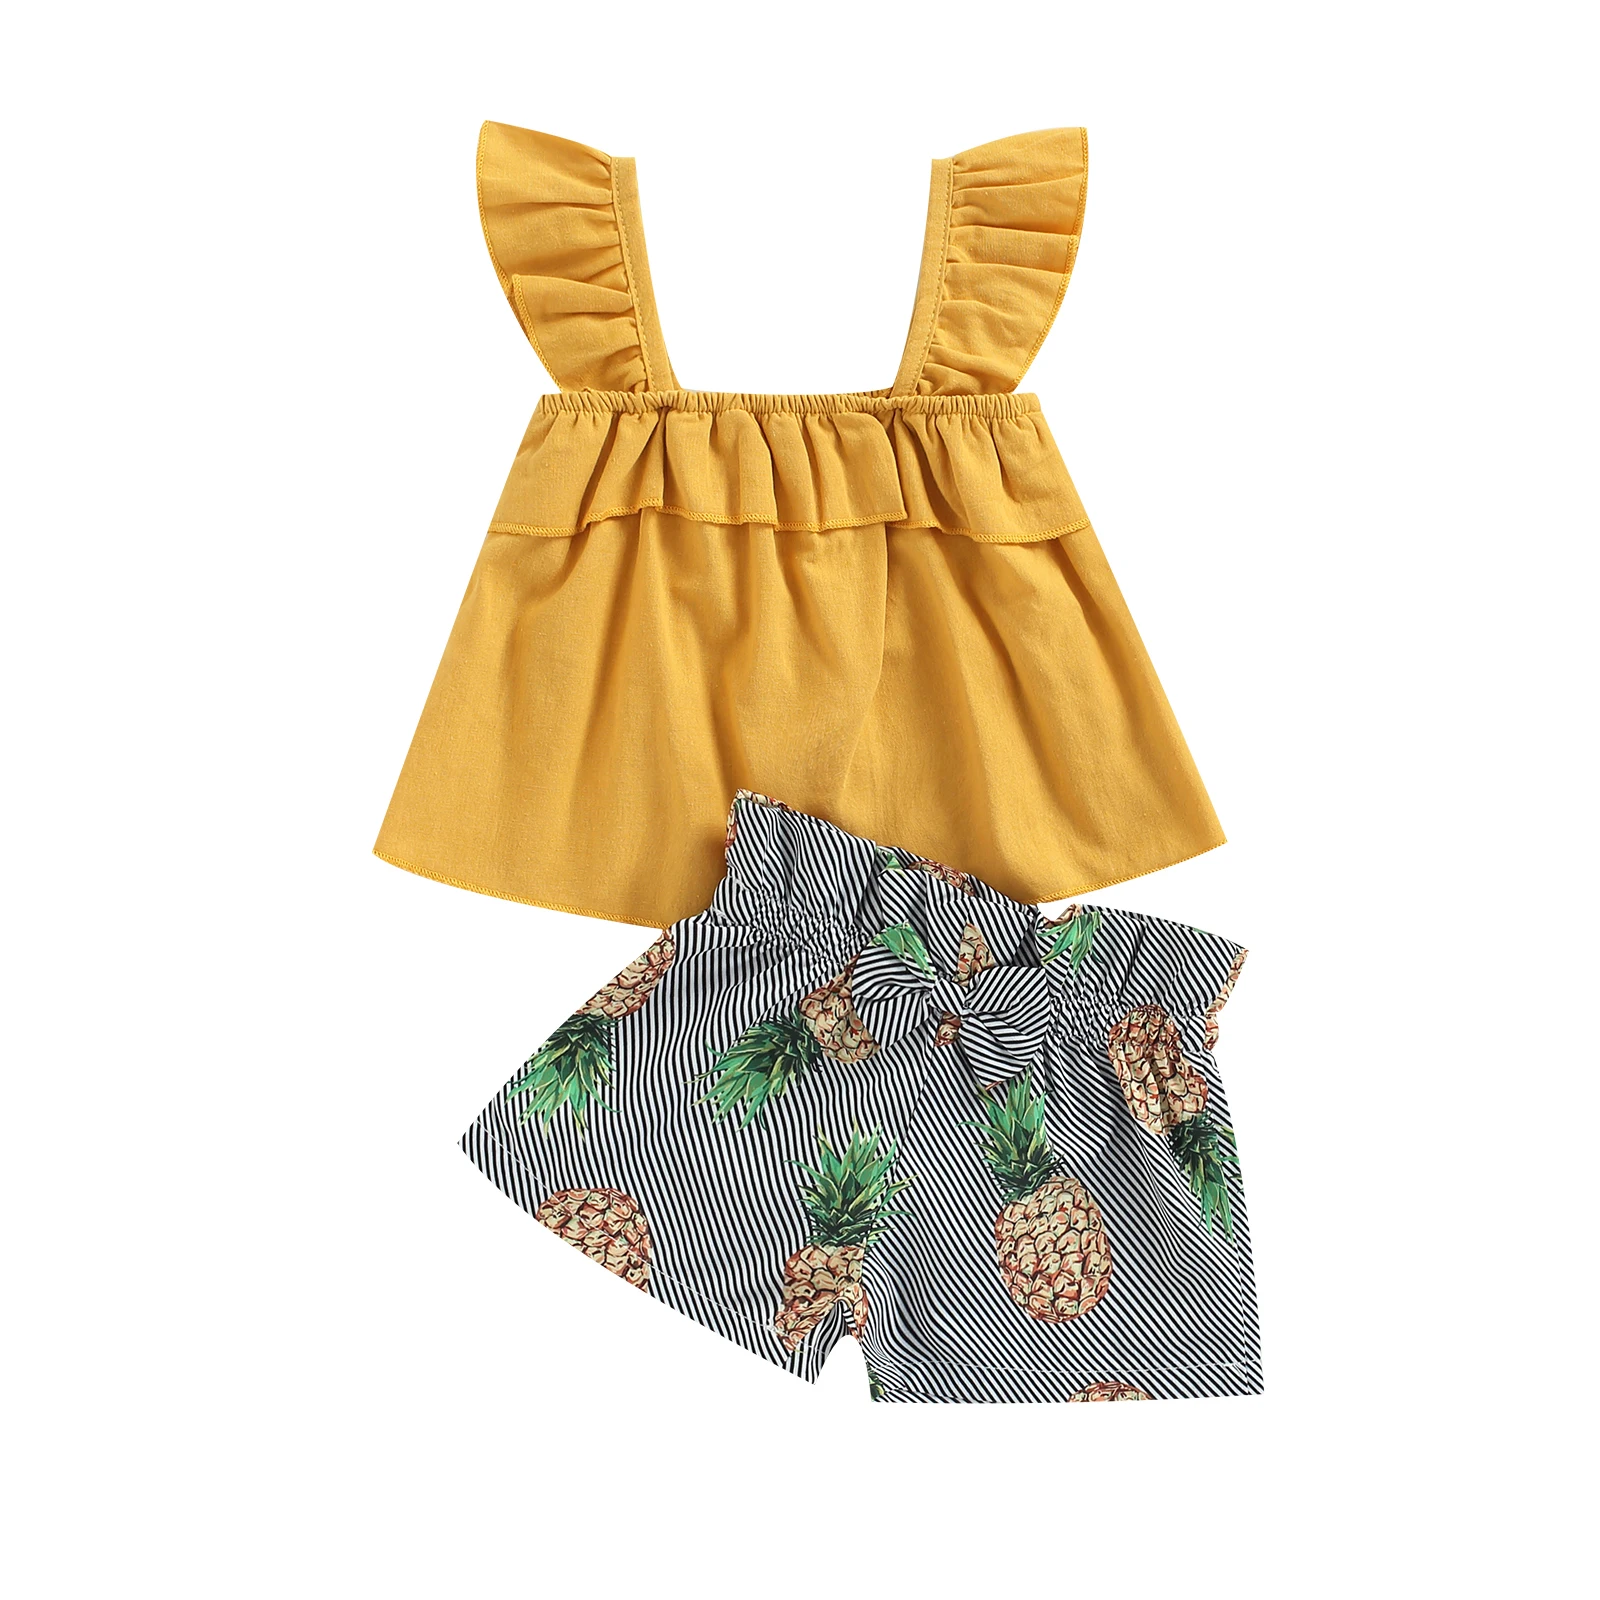 

Toddler Baby Girls Summer Outfit Sets Yellow Ruffle Sleeve Camisole + Pineapple Print Striped Shorts 6M-3T